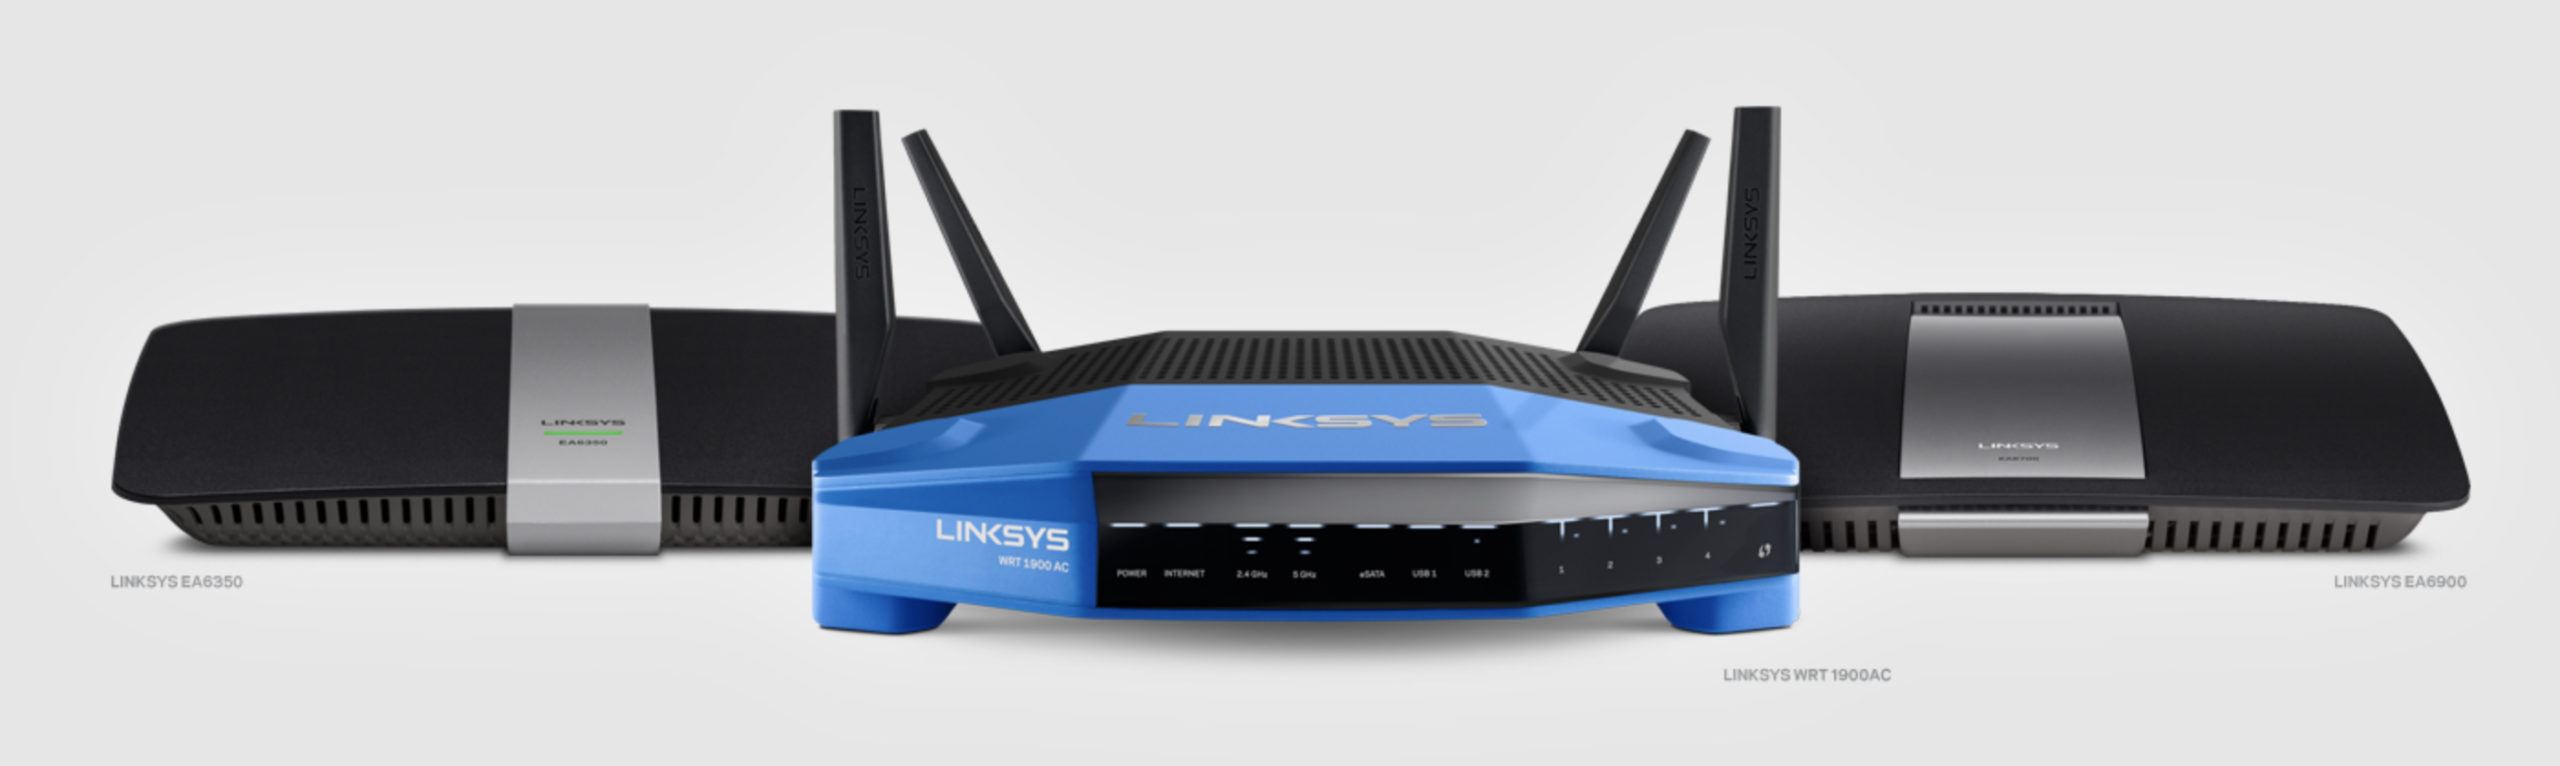 E series Smart Wifi Routers | Myrouter.local